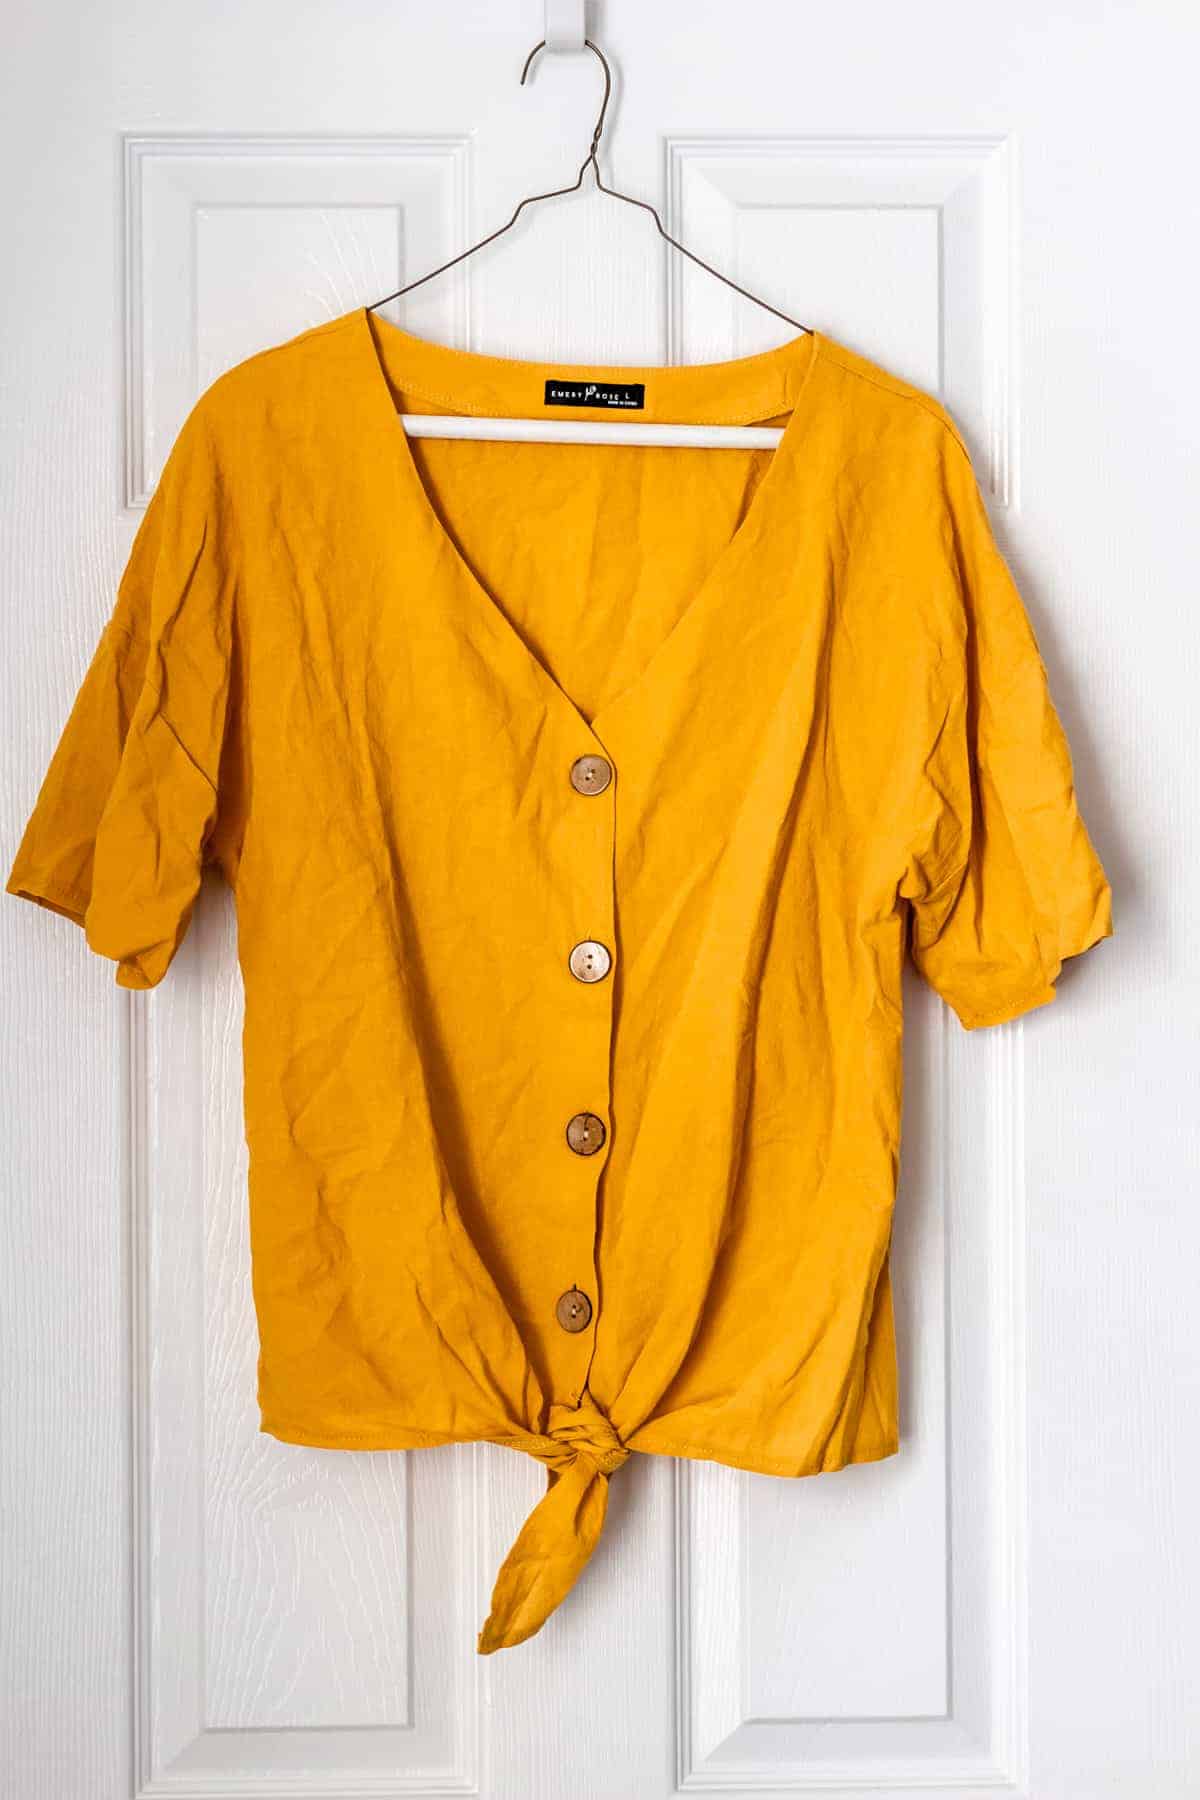 EMERY ROSE Solid Button Front Knot Hem Blouse in yellow on a hanger